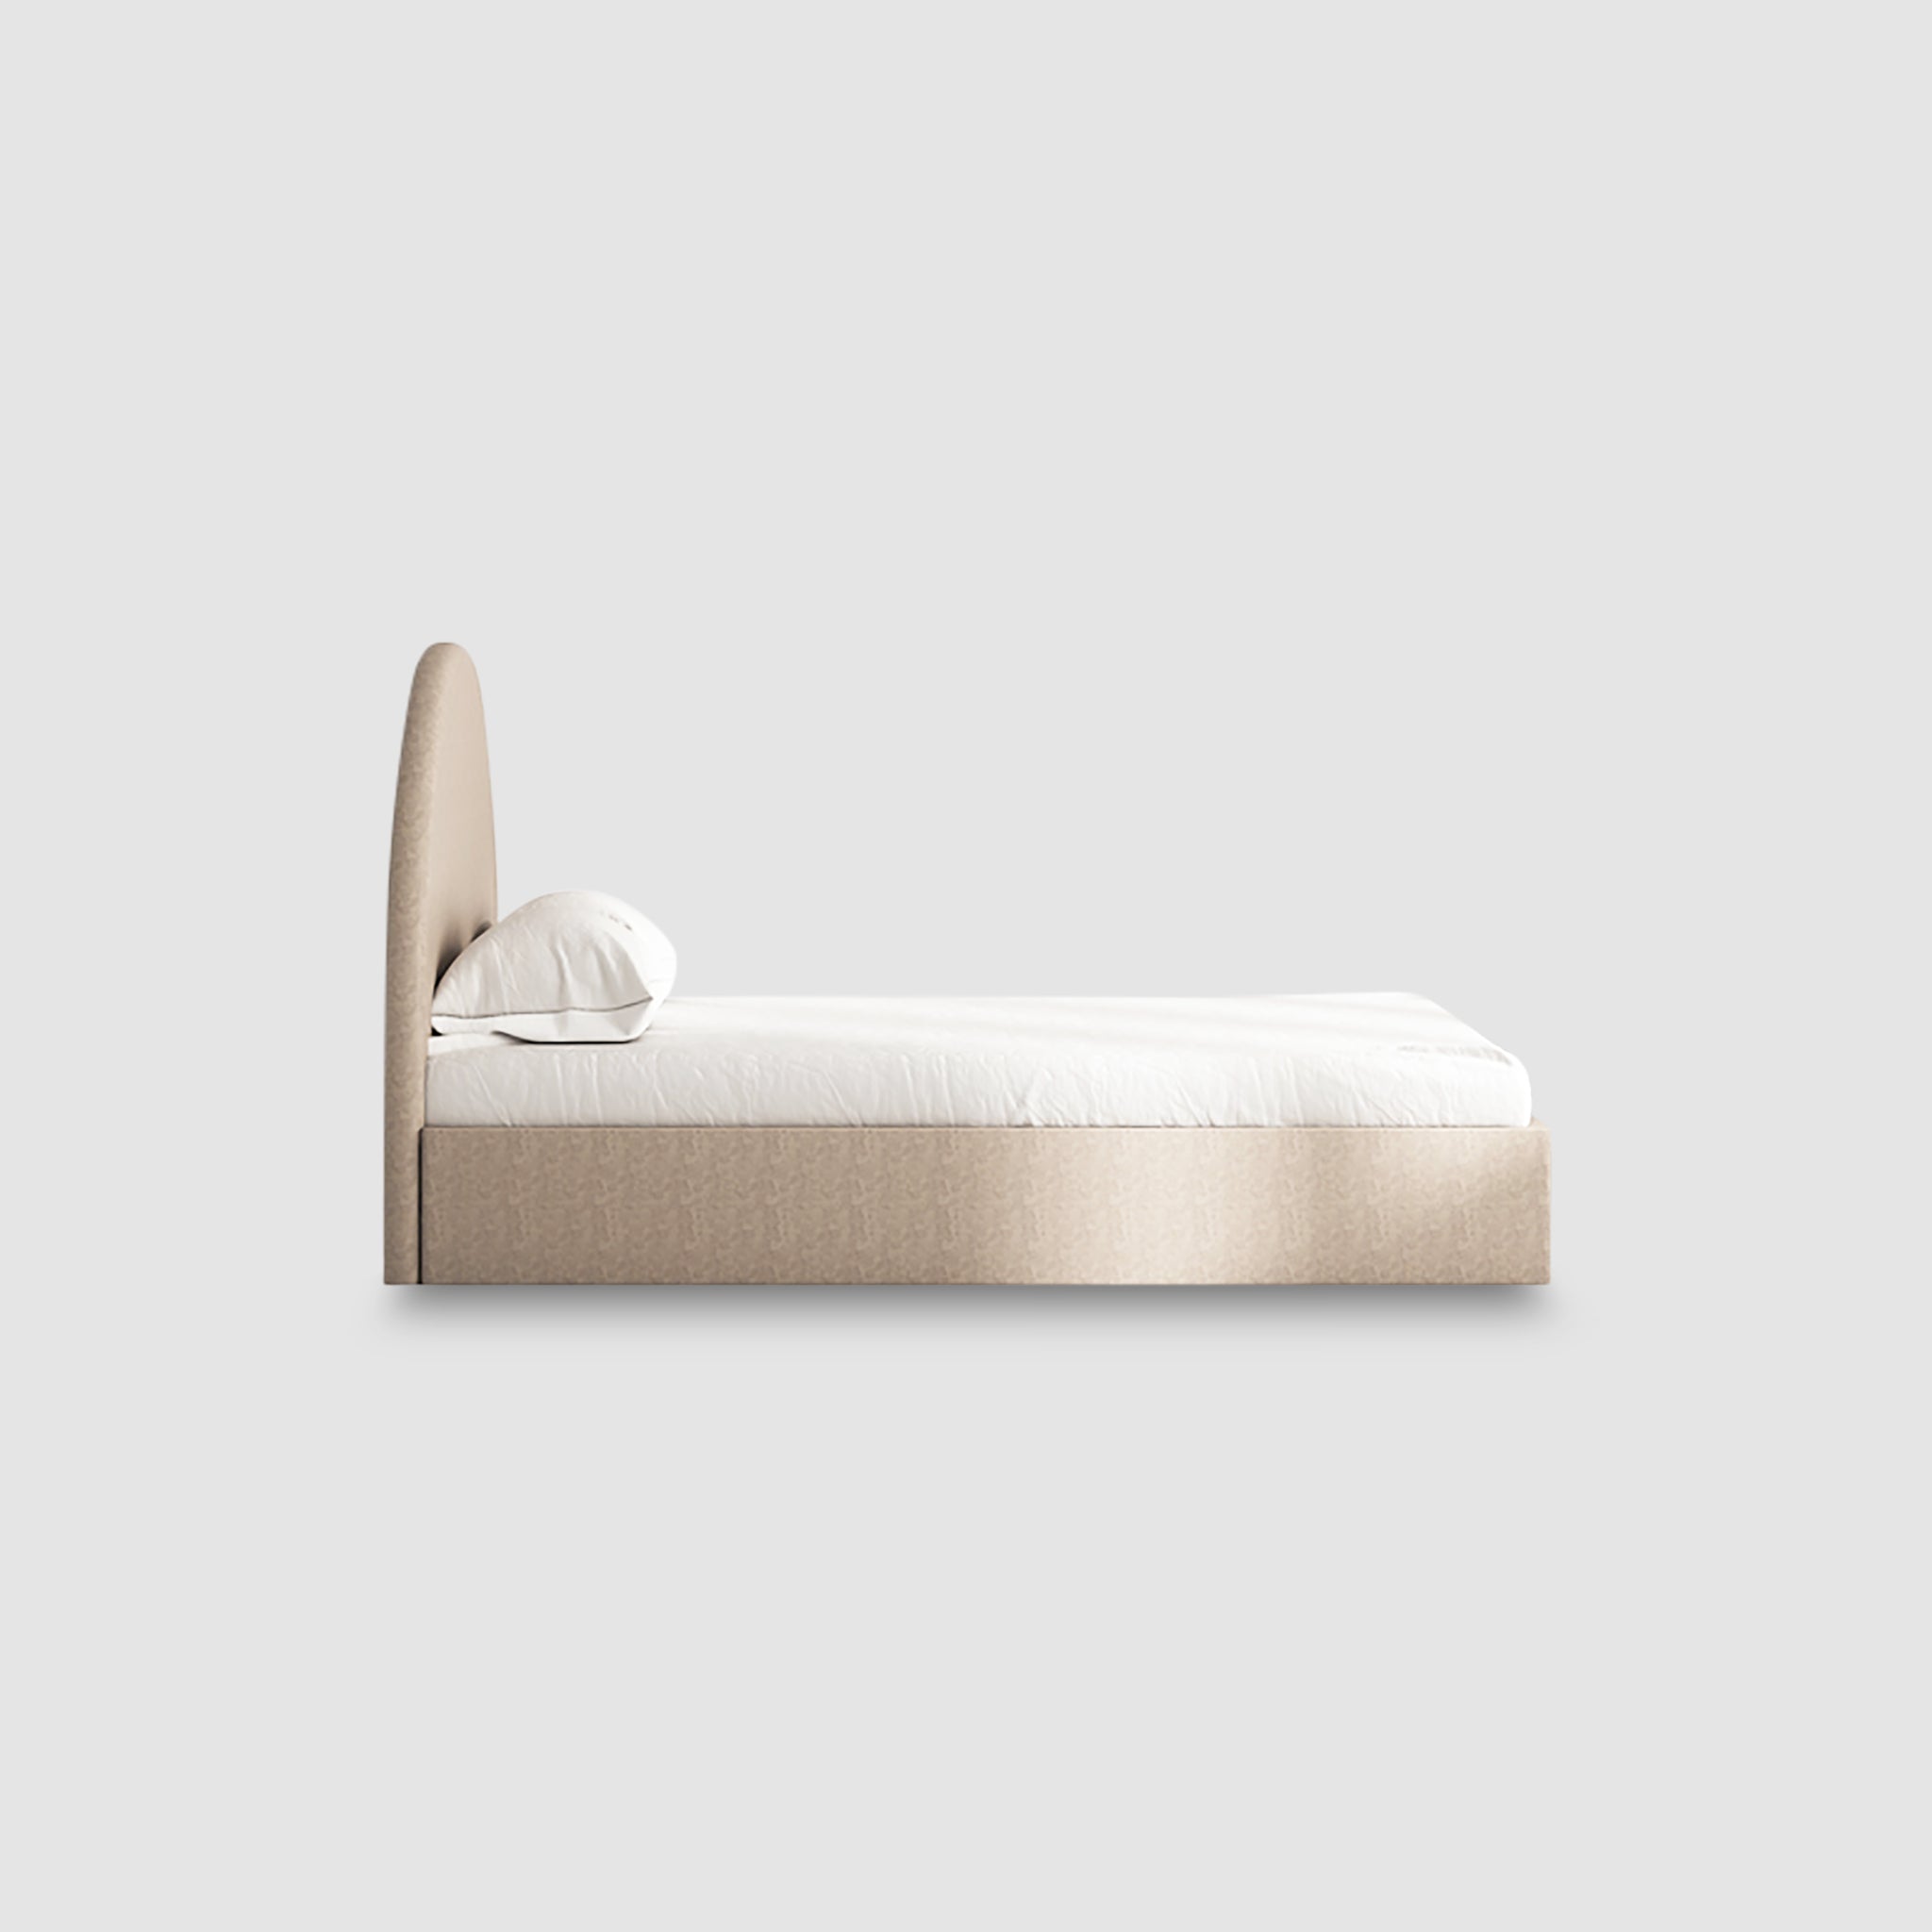 Space-efficient Archie Bed in warm beige upholstery, perfect for smaller rooms.